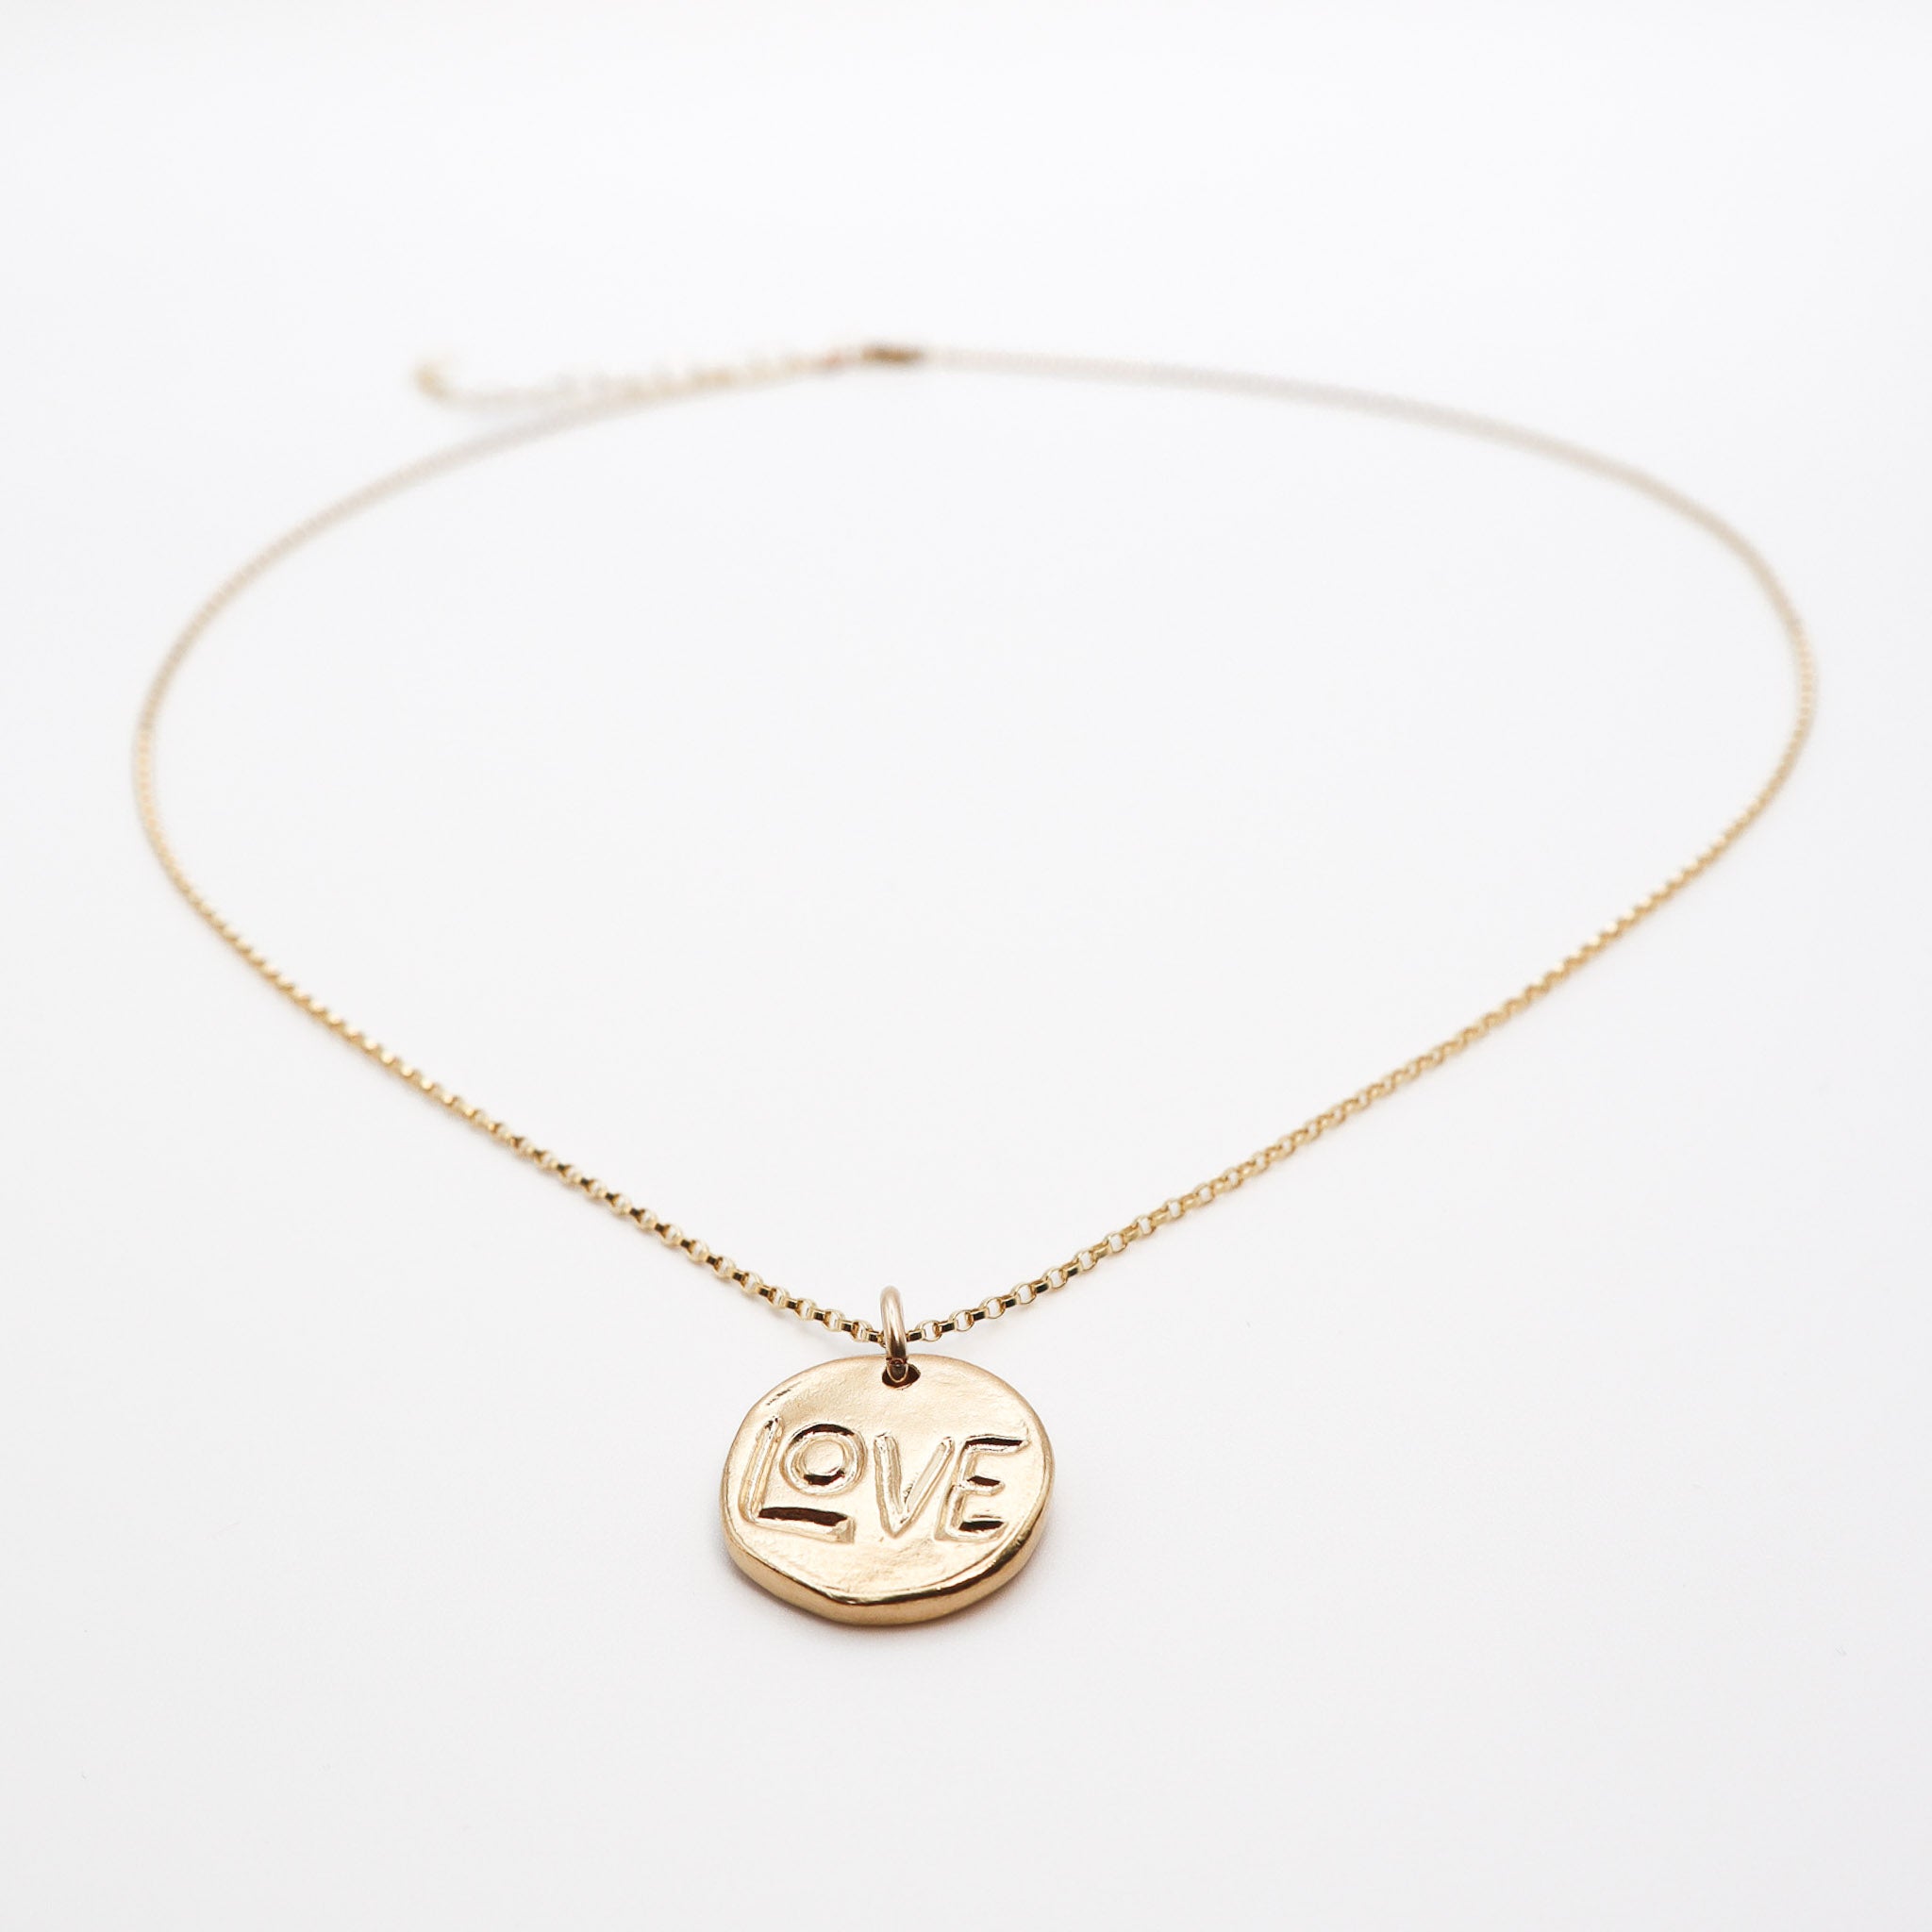 Gold Love Pendant Necklace, product image with charm closeup